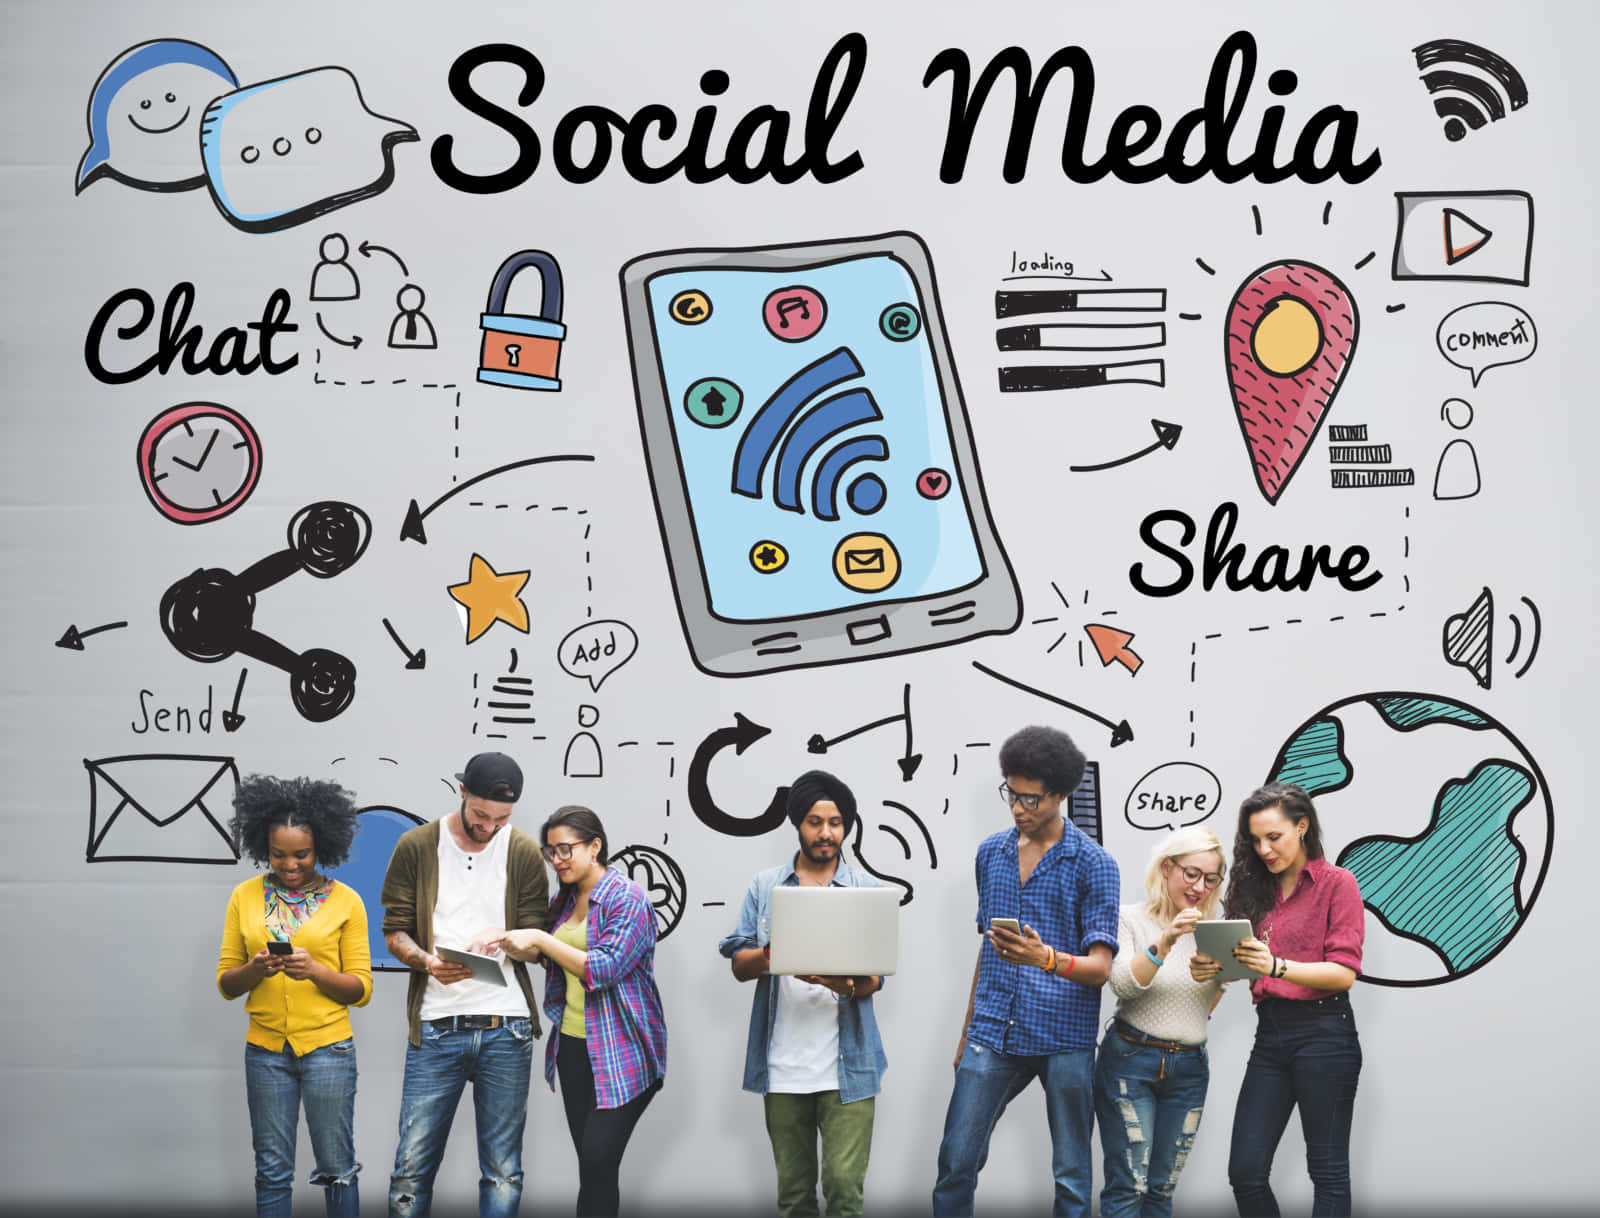 Social Media Marketing - A Guide For Small Business Owners